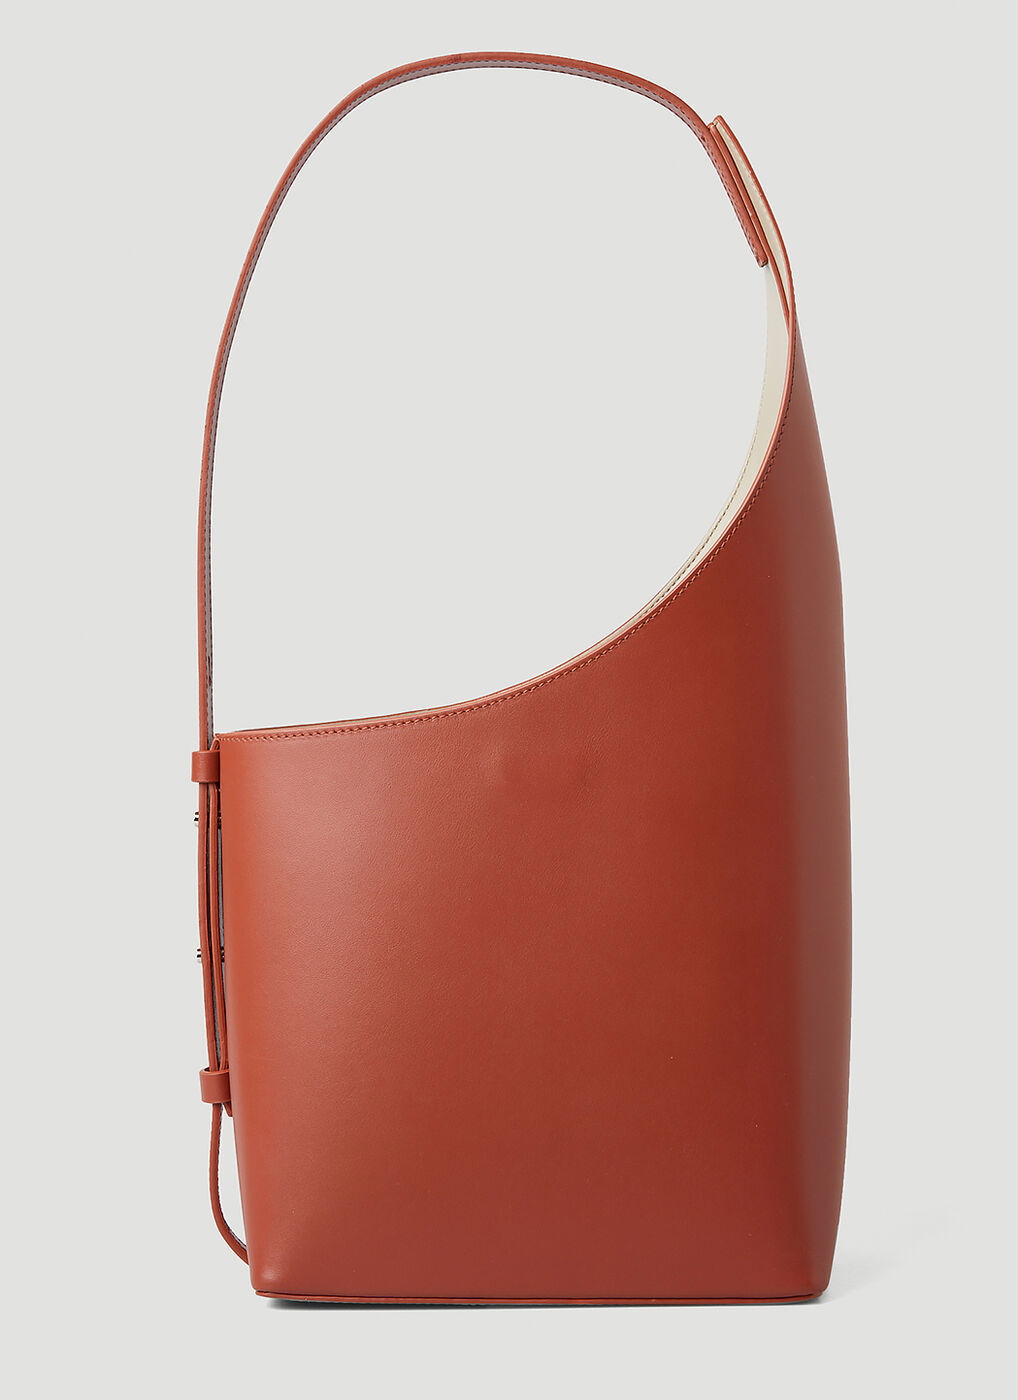 Demi lune smooth leather shoulder bag - Aesther Ekme - Women